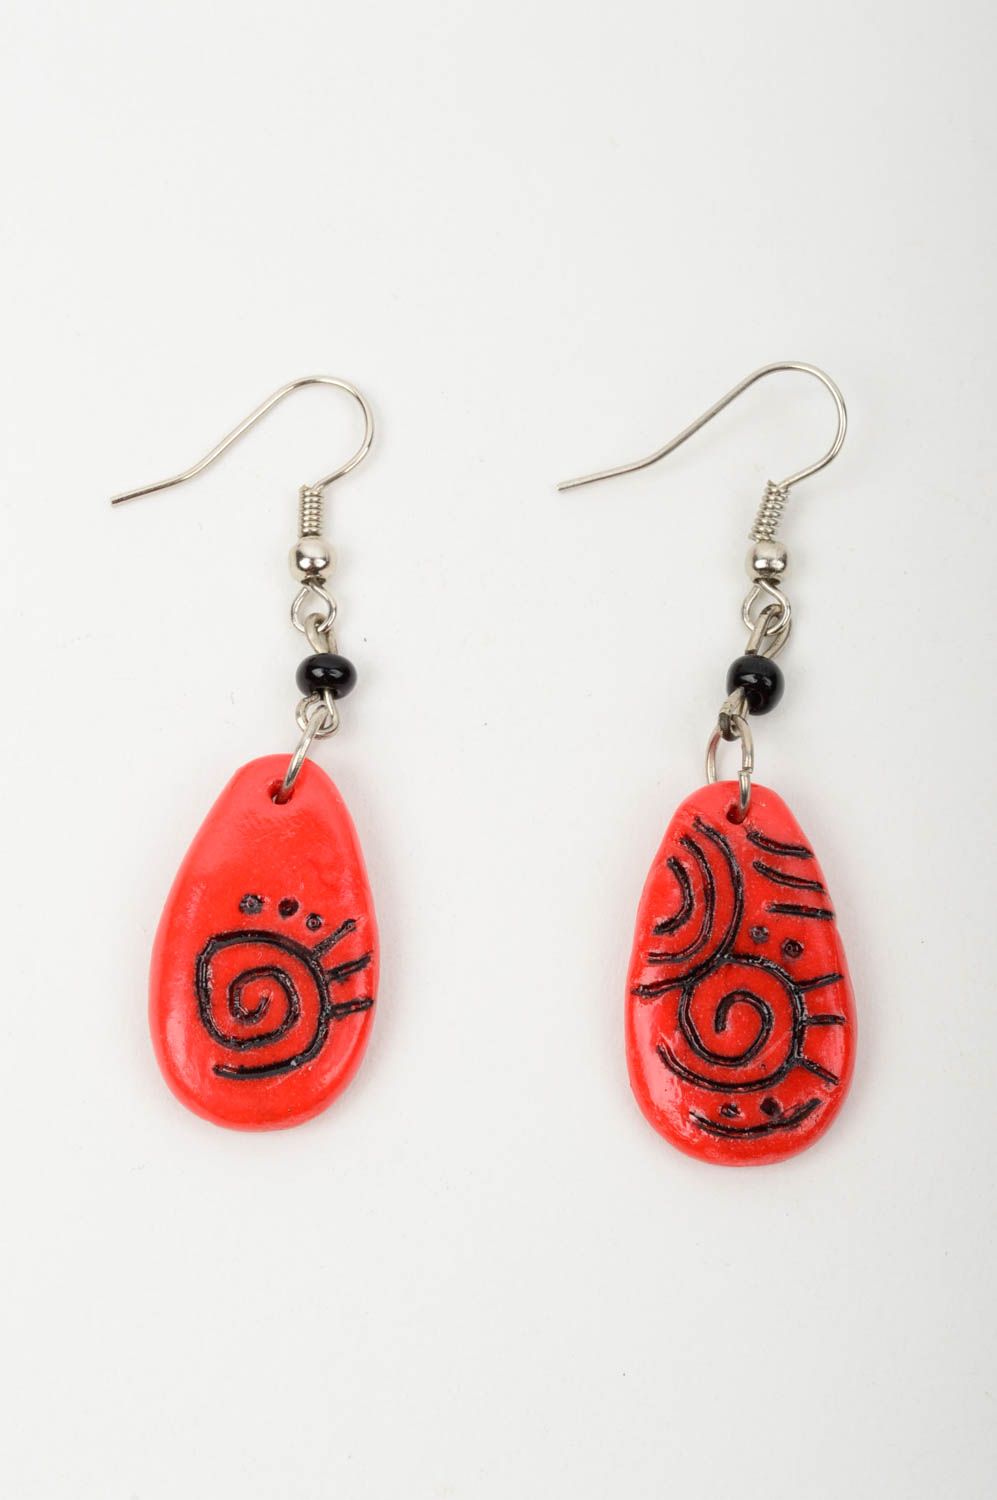 Handmade jewelry designer accessories polymer clay dangling earrings gift ideas photo 3